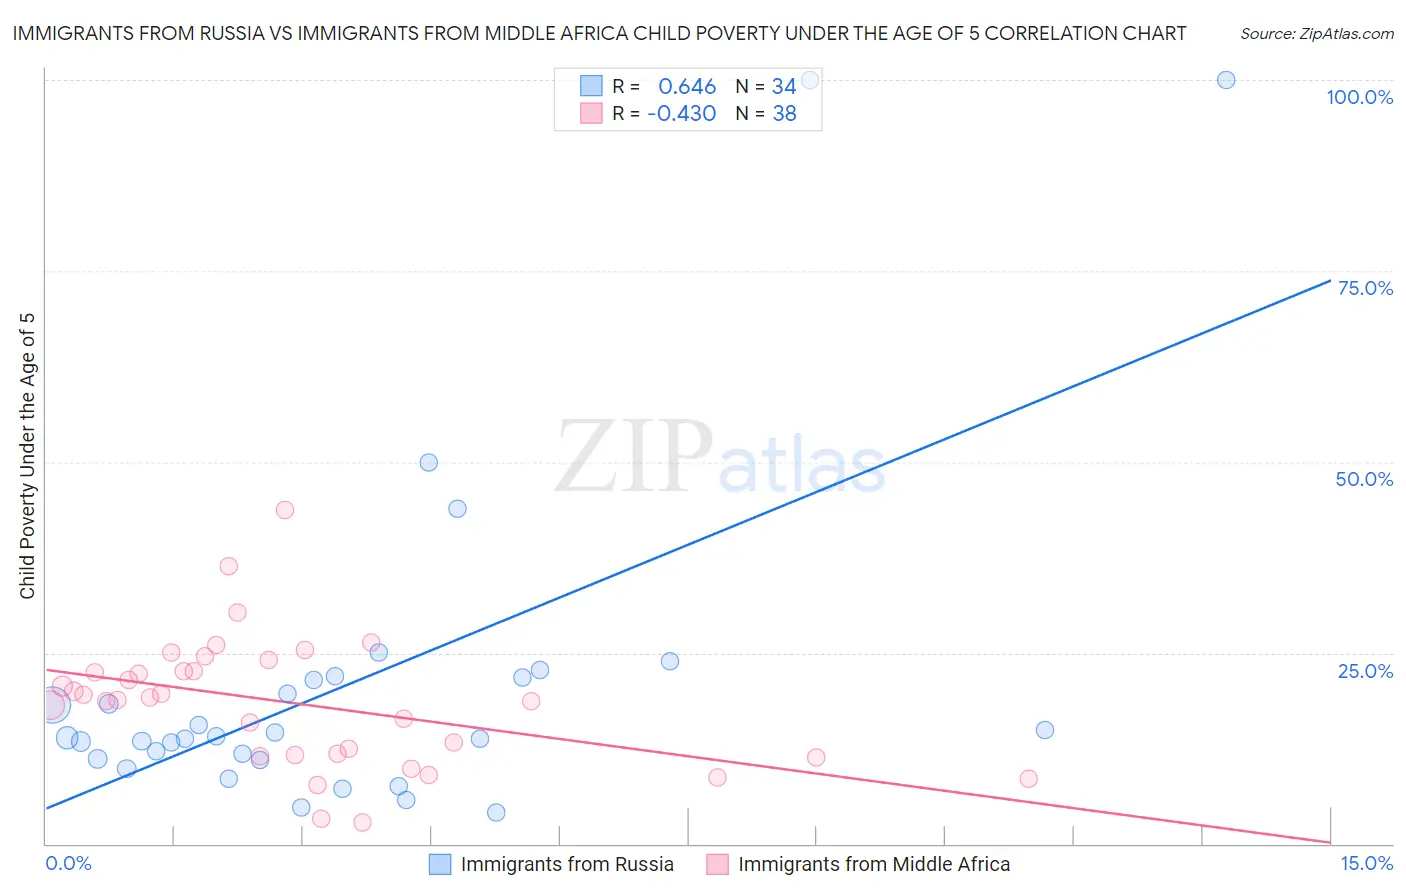 Immigrants from Russia vs Immigrants from Middle Africa Child Poverty Under the Age of 5